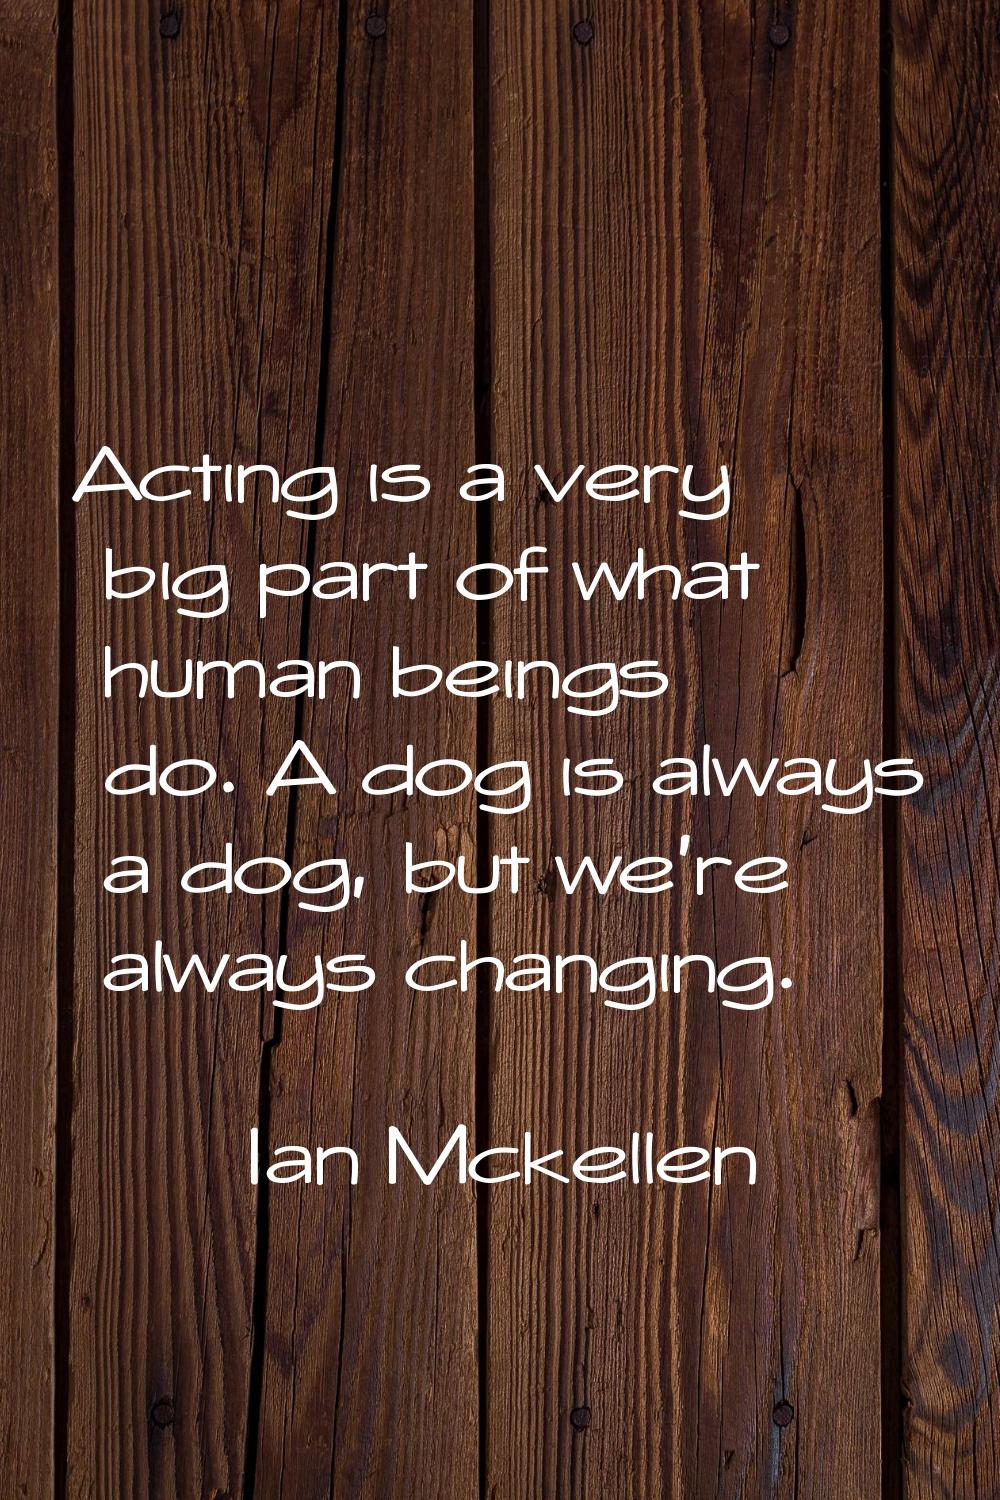 Acting is a very big part of what human beings do. A dog is always a dog, but we're always changing